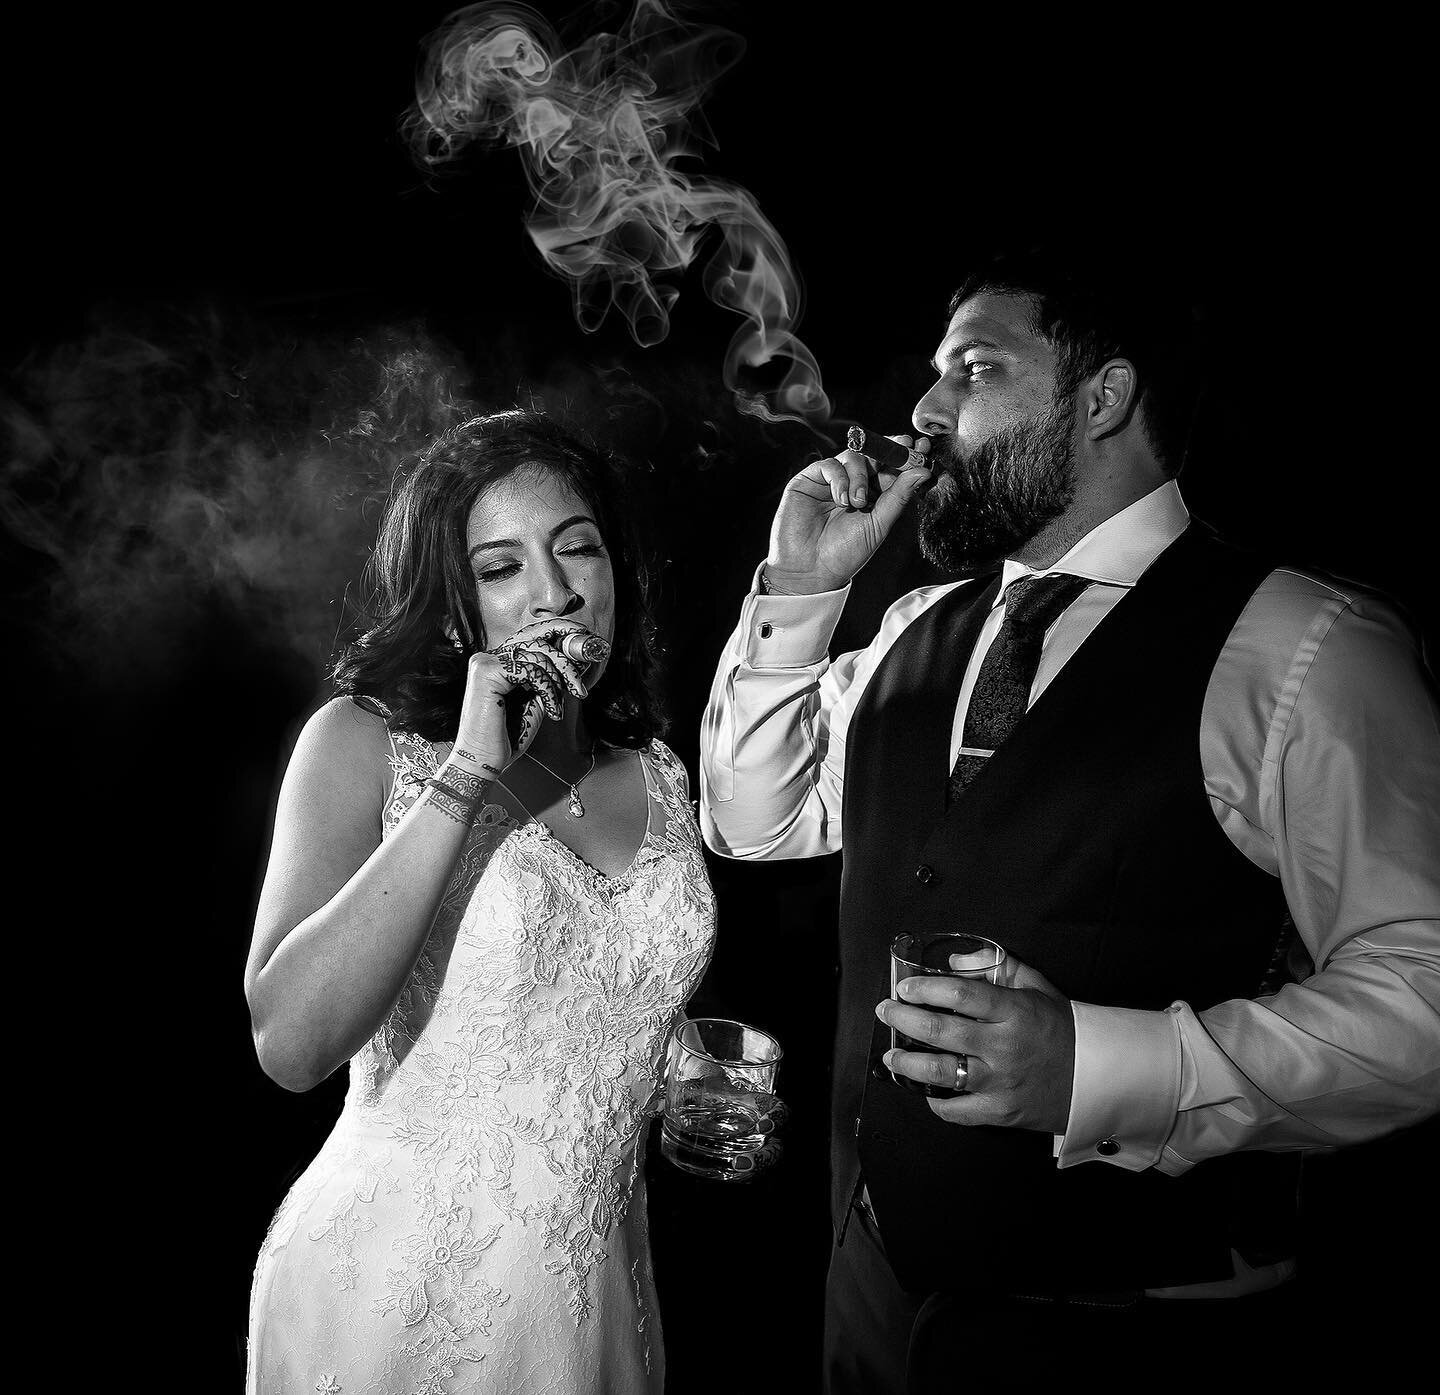 Ciga-cigar right from Cuba-Cuba&hellip;
.
.
Capturing the true characters of my couples!
Meenal and Wayne, thank you for having us document your fun filled wedding occasions
.
.

Apresh Chavda Photography
www.apreshchavda.com
+447747777007
info@apres